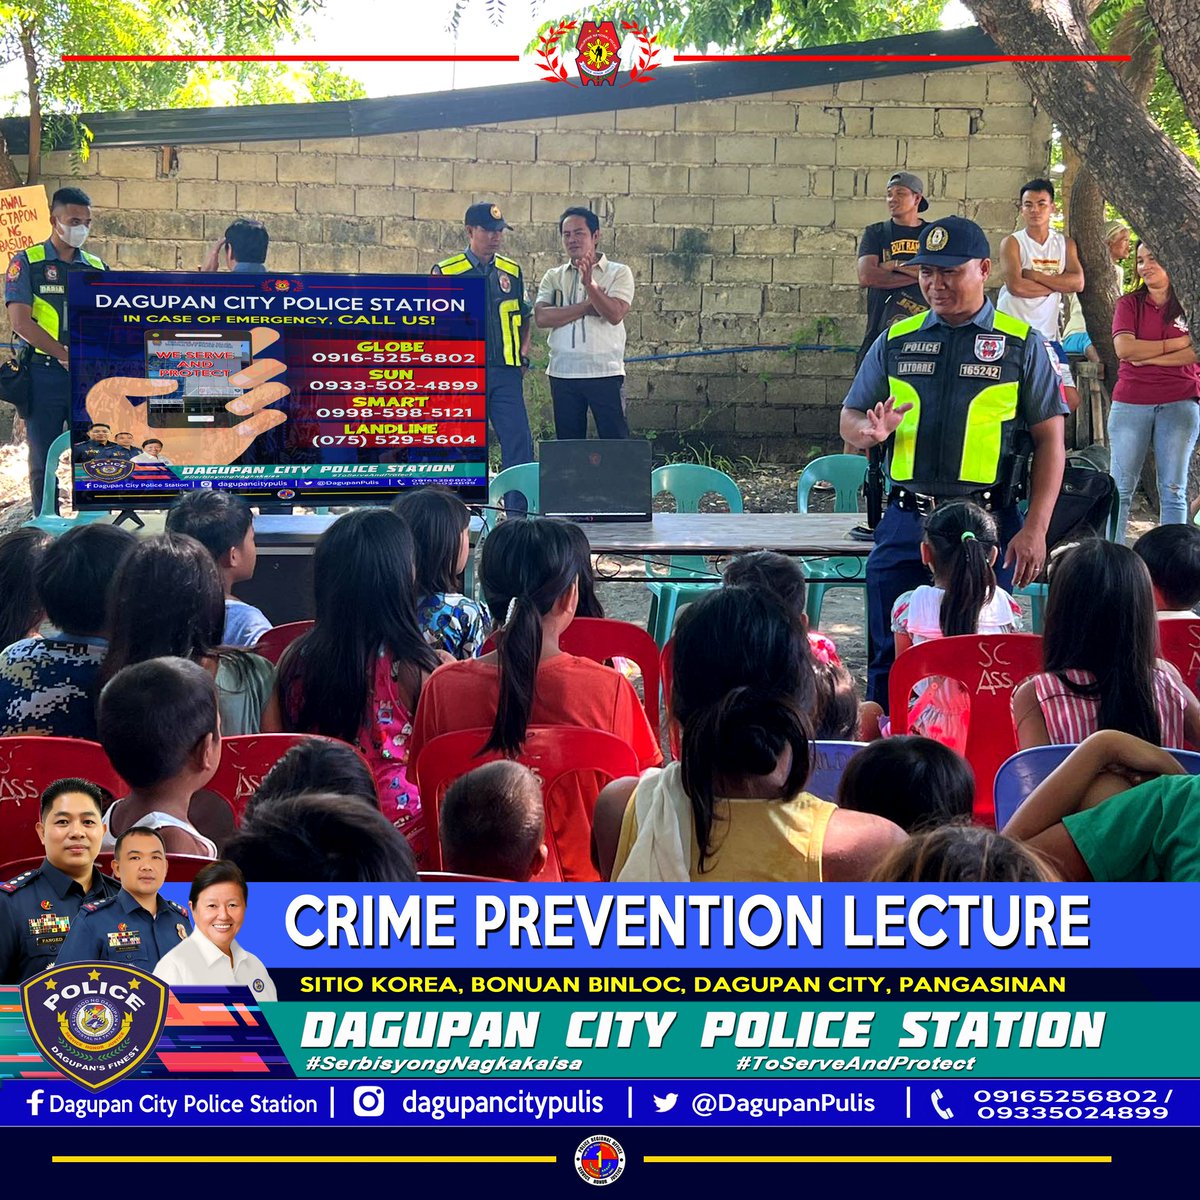 PSMS Ruby Latorre, PCP-6 Commander of Dagupan CPS, under the supervision of PLTCOL BRENDON B PALISOC, OIC, conducted lecture on Crime Prevention during the KASIMBAYANAN sa Barangay at Sitio Korea, Bonuan Binloc, Dagupan City, Pangasinan. #SerbisyongNagkakaisa #ToServeandProtect